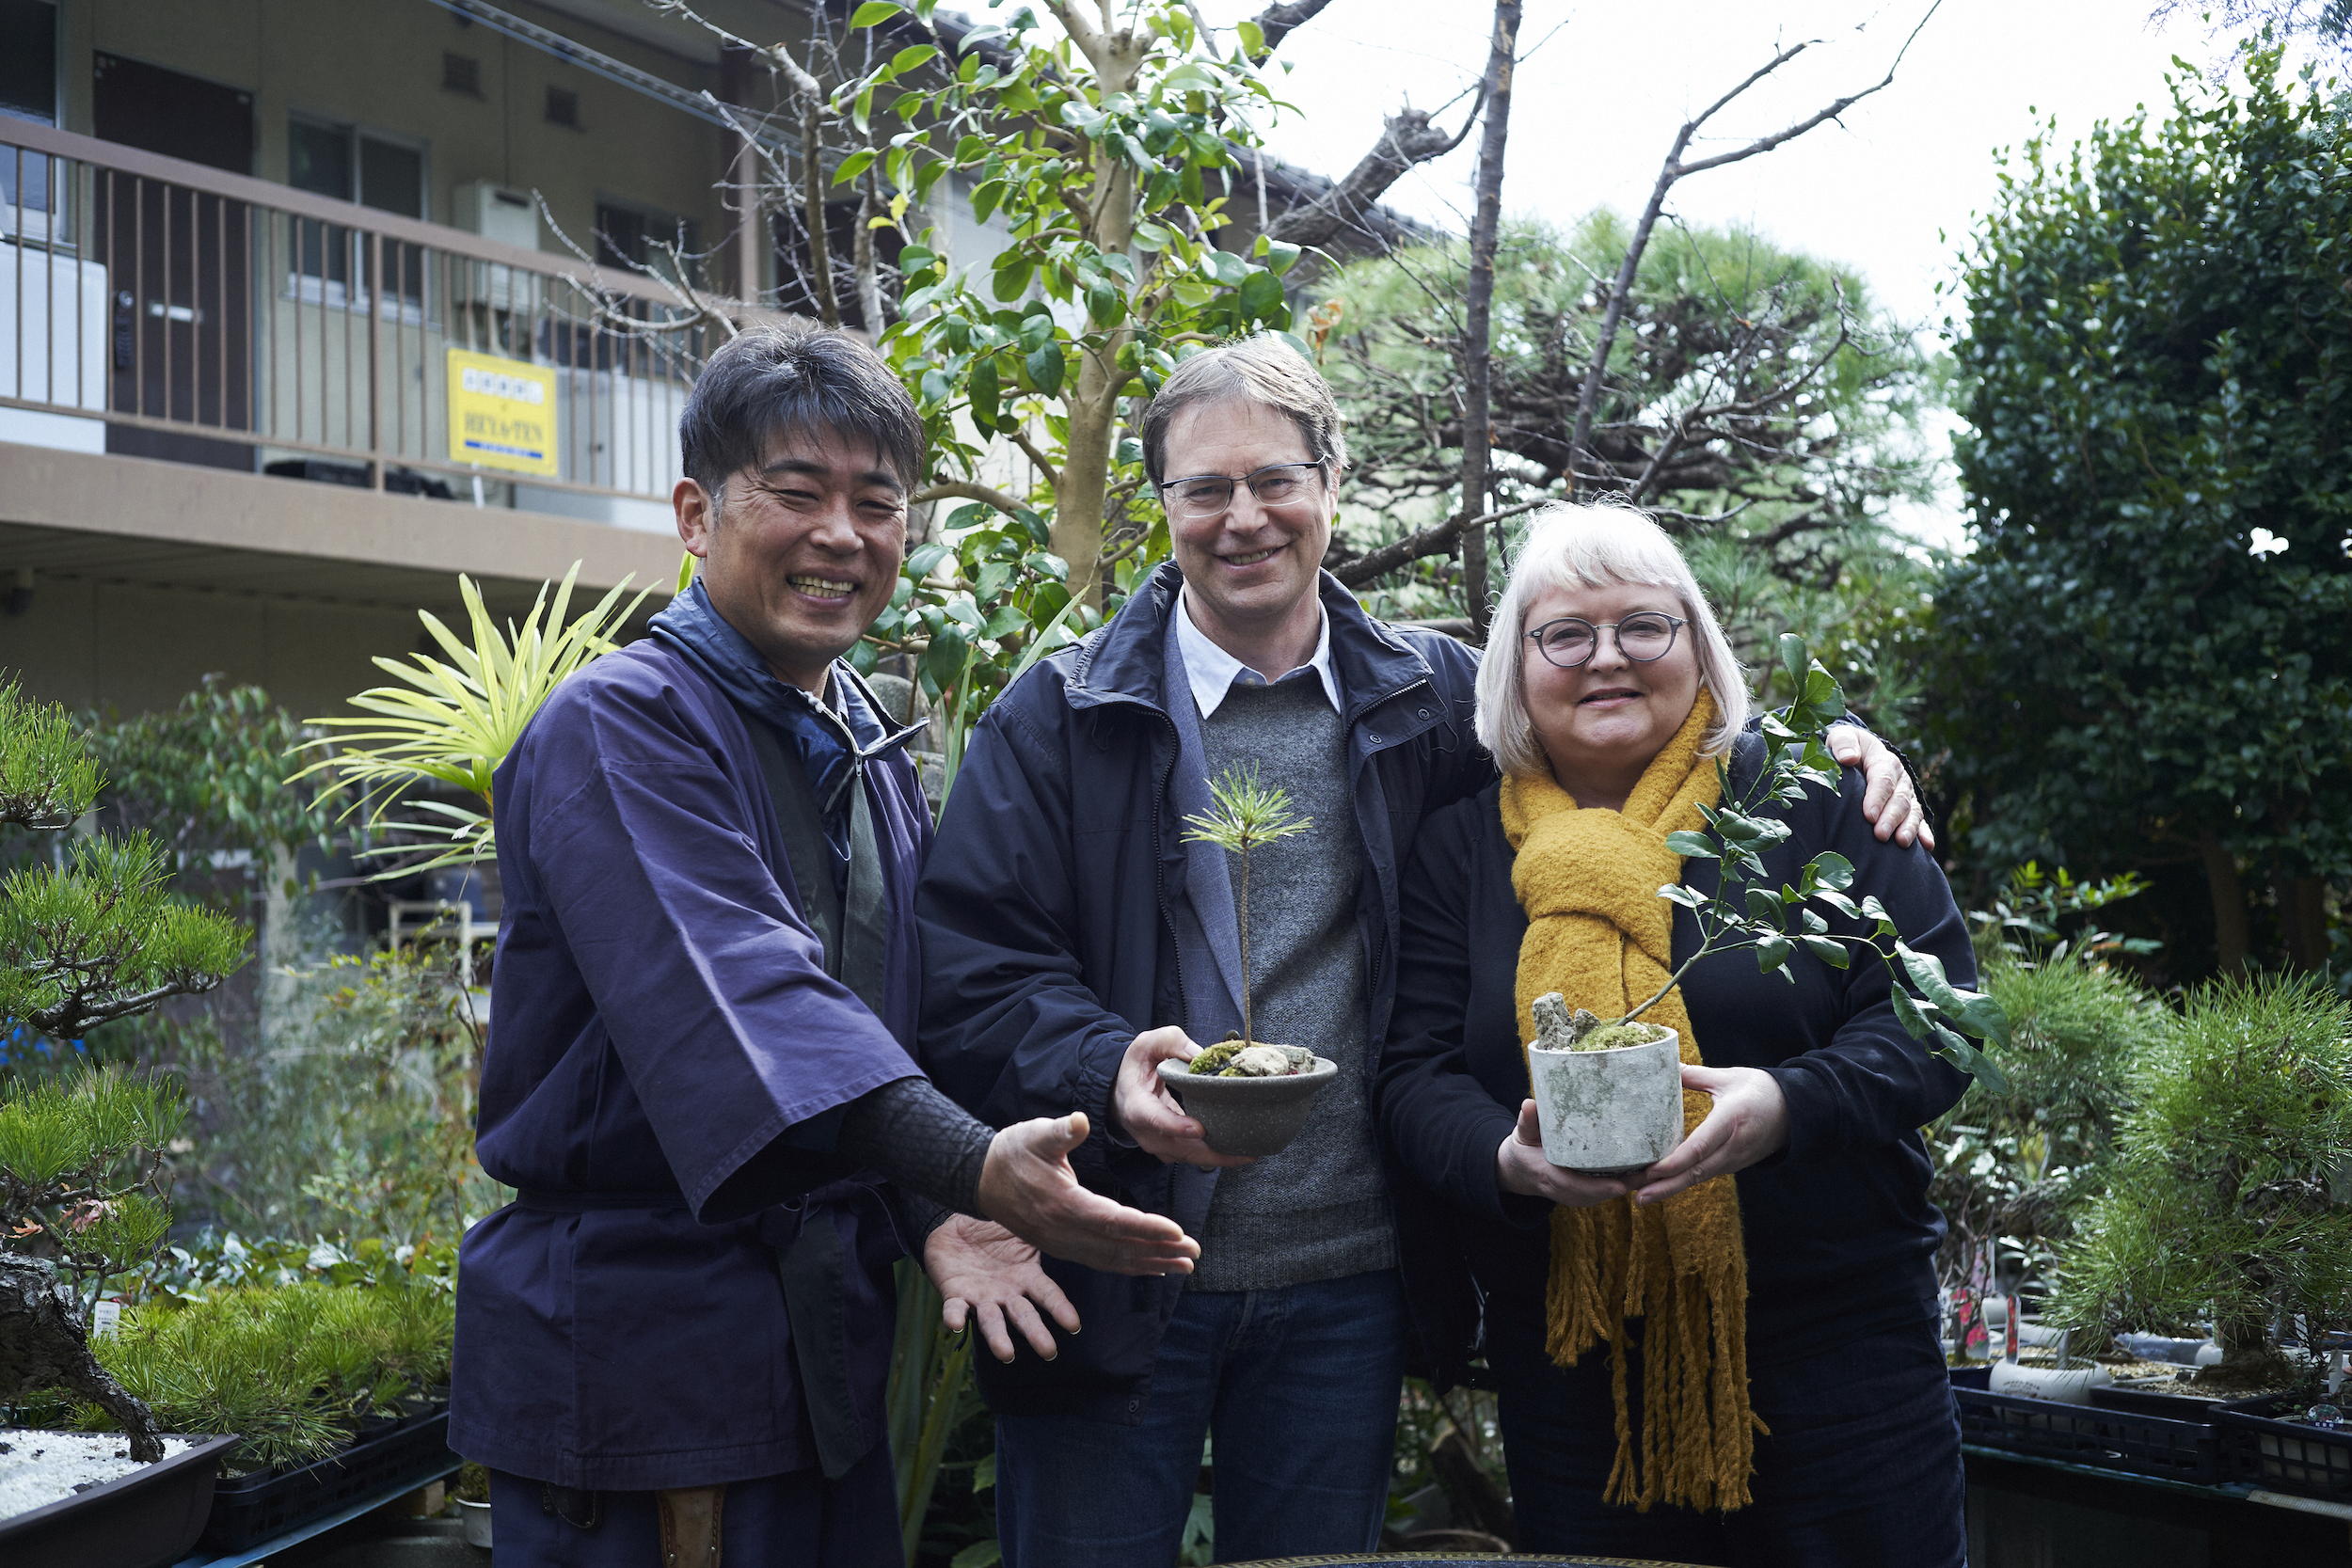 Bonsai-making workshop in Koi, Hiroshima, a famous bonsai-producing area with 400 years of history